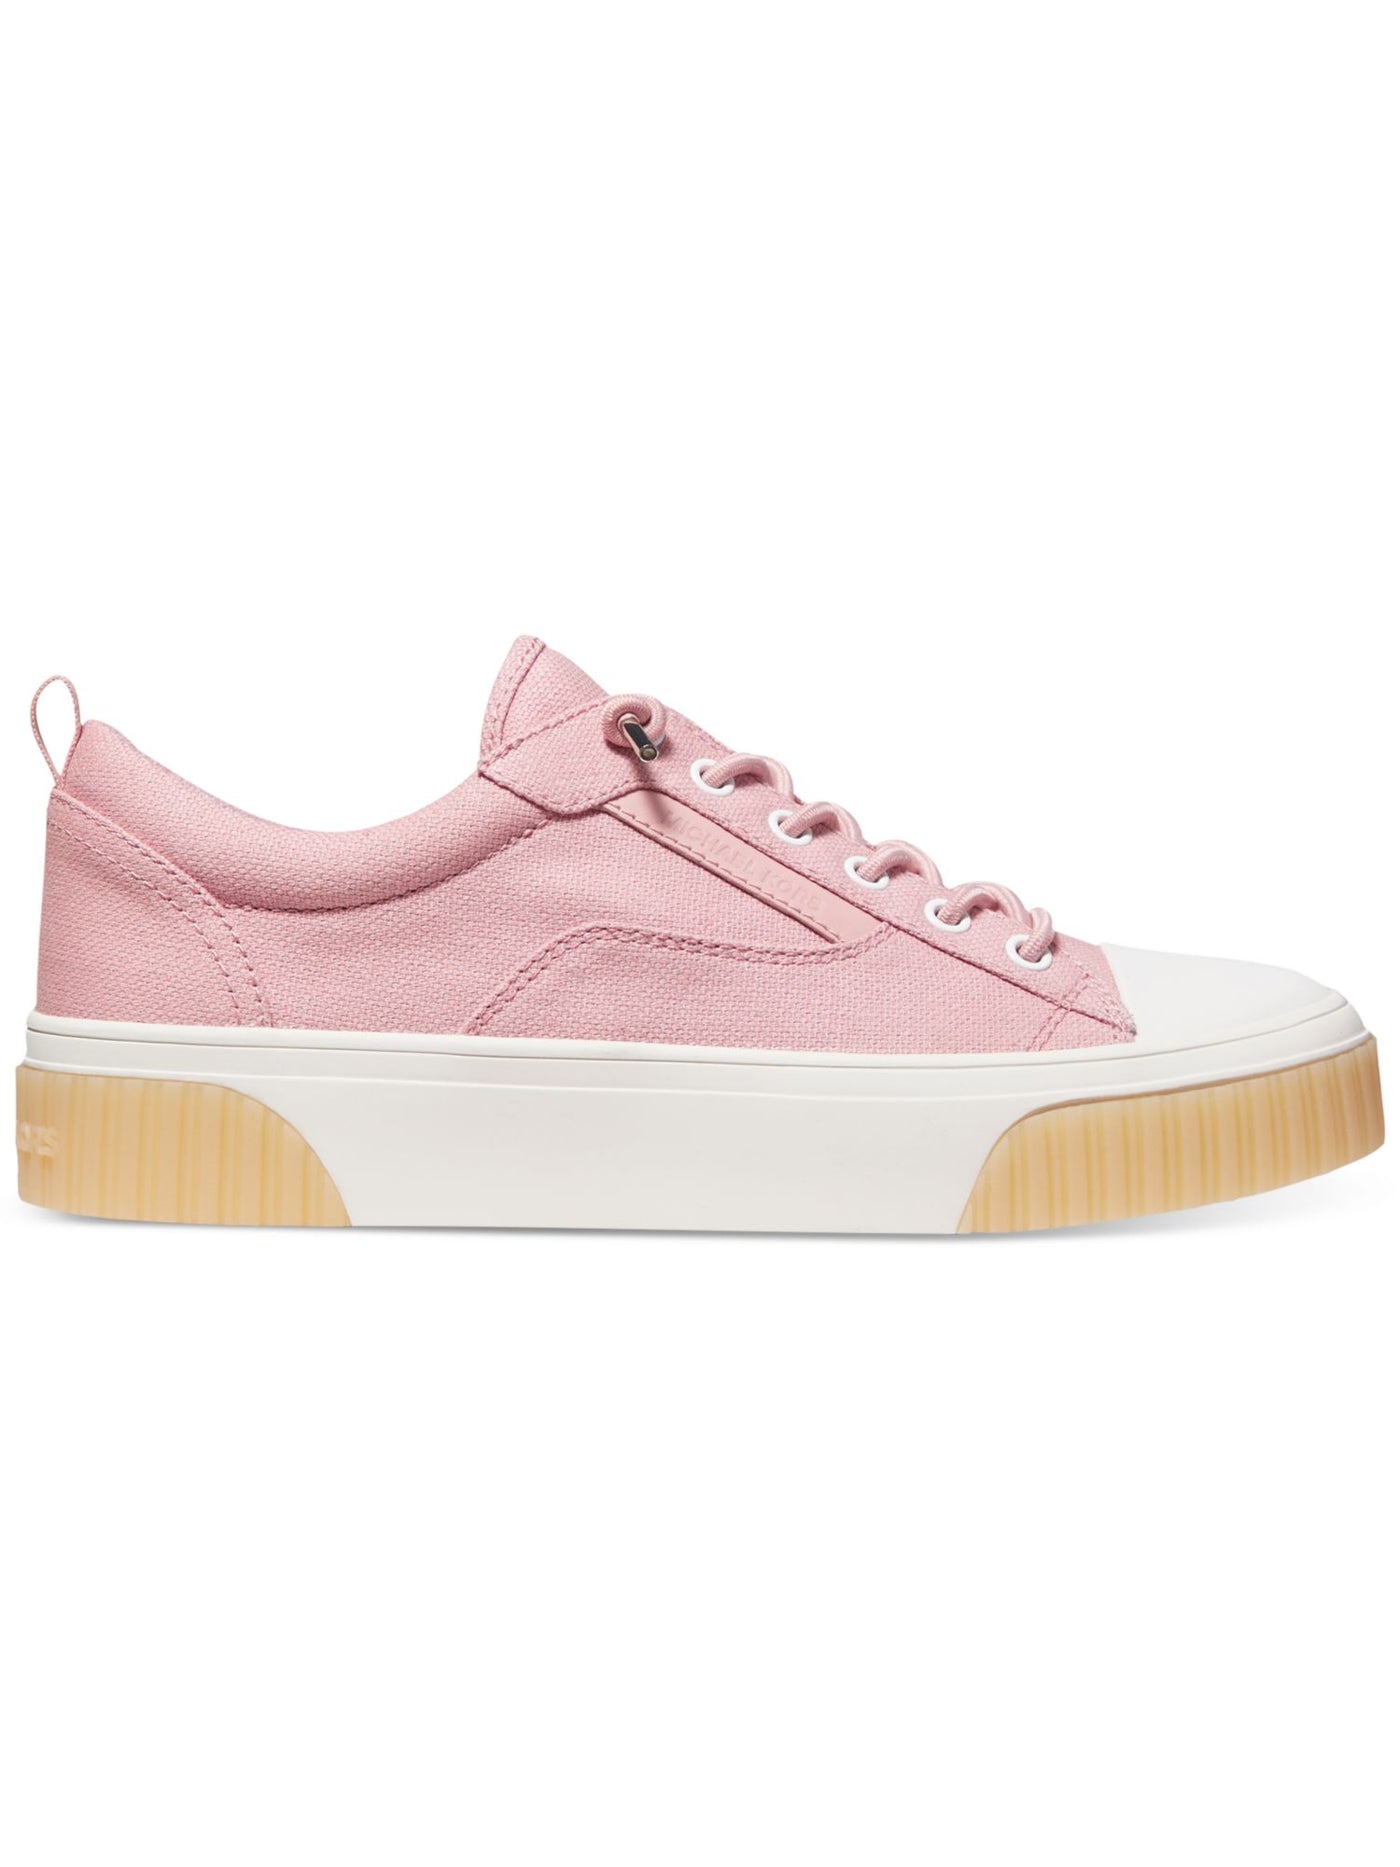 MICHAEL KORS Womens Pink Padded Collar Heel Tab Stay Put Laces Comfort Padded Oscar Round Toe Platform Lace-Up Athletic Sneakers Shoes